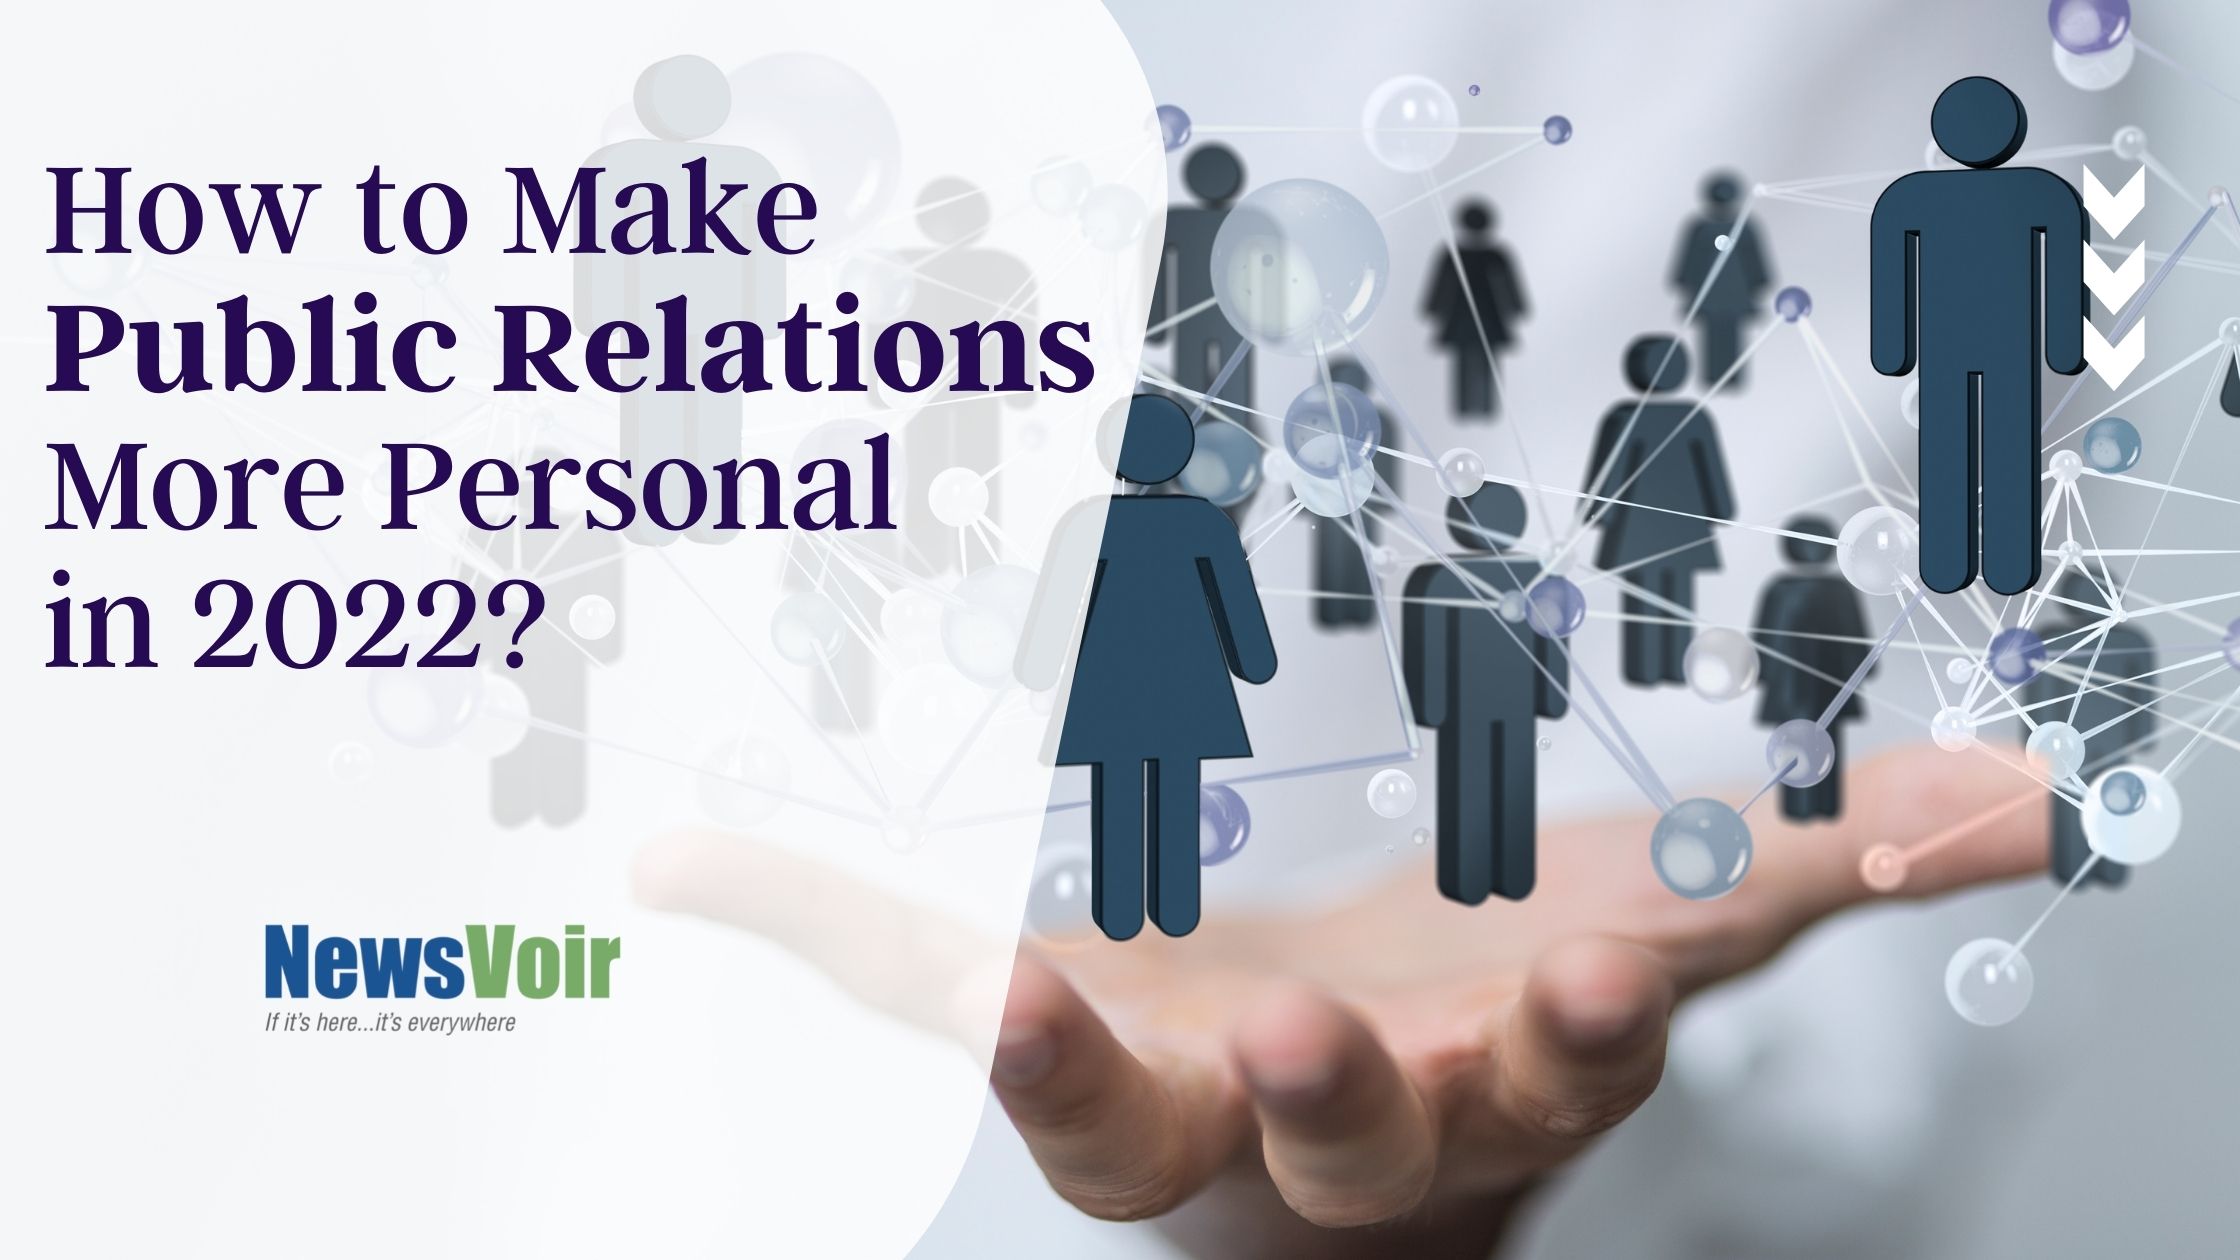 Making Public Relations More Personal